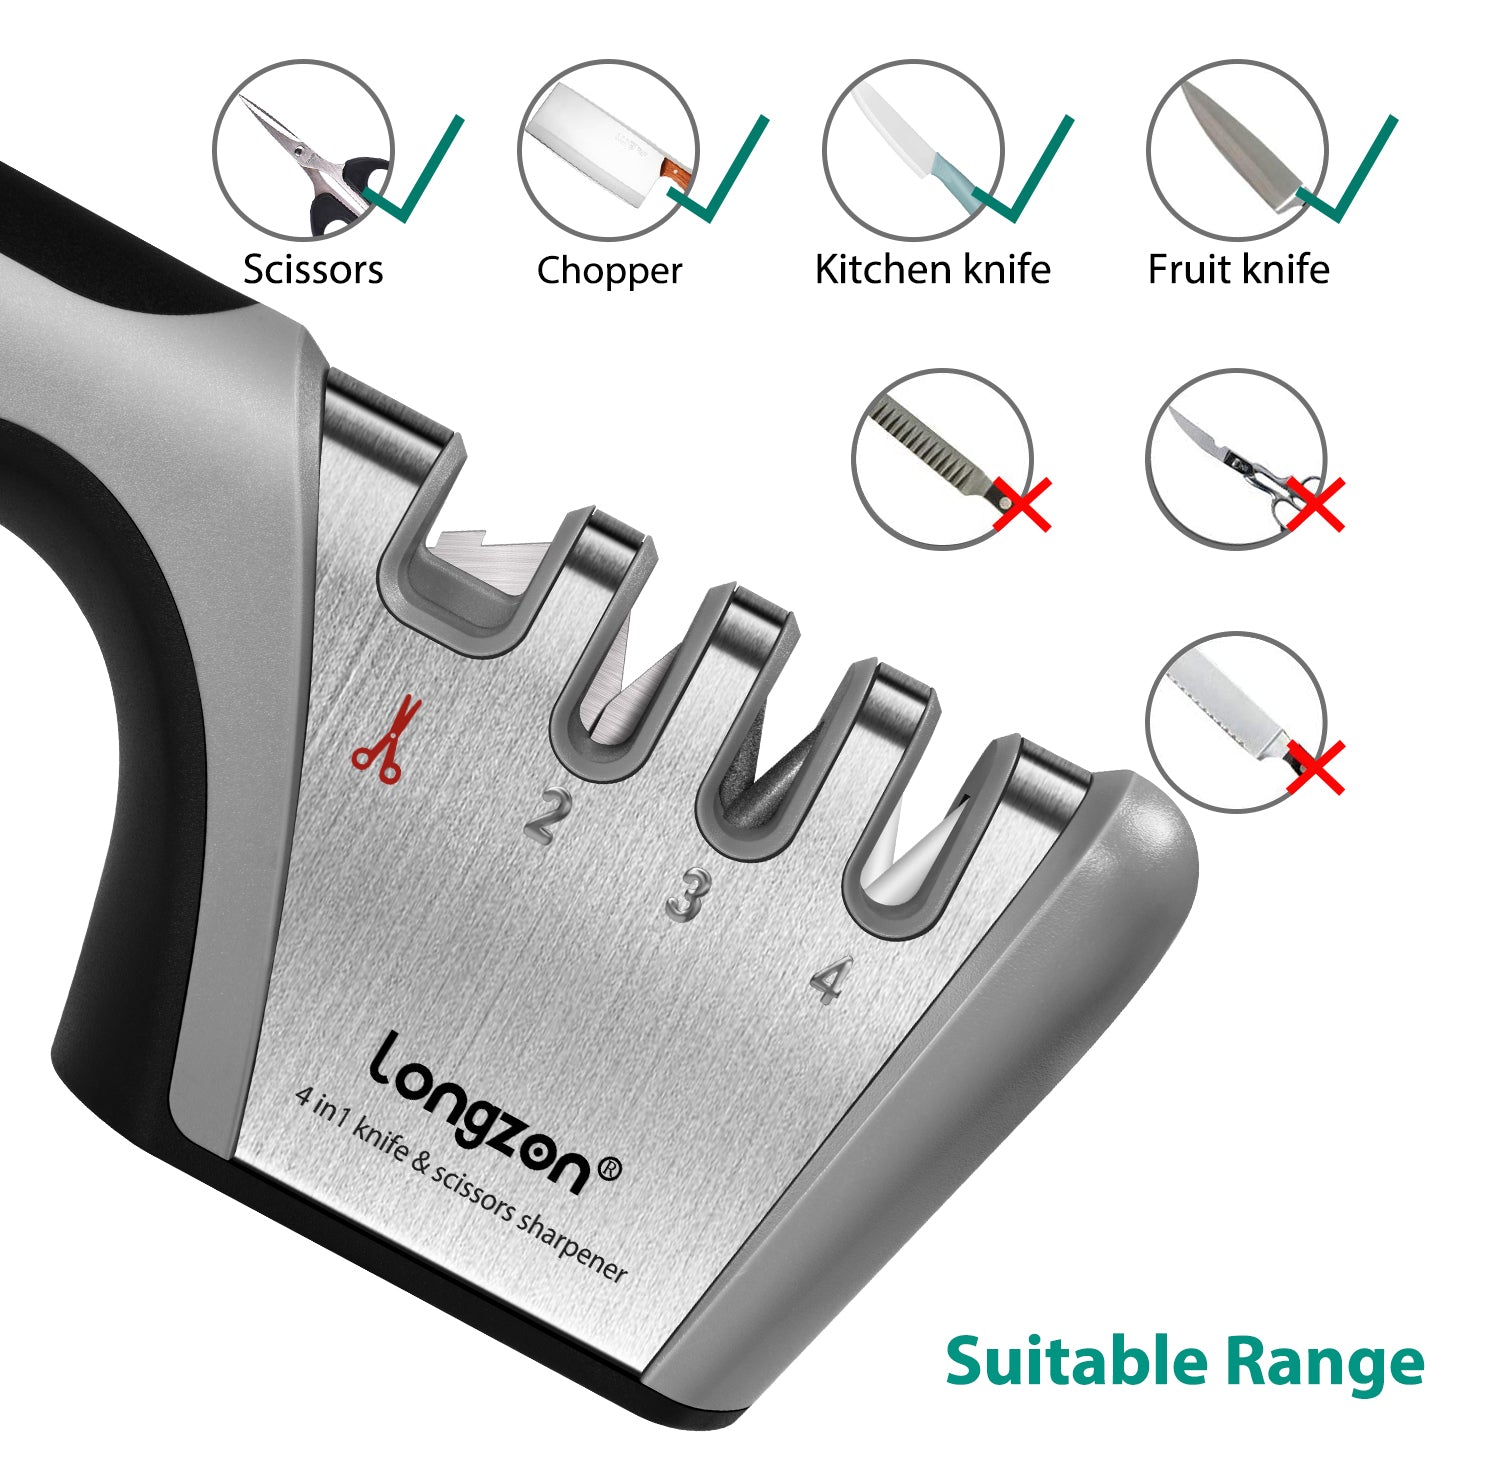 3/4-in-1 Knife Sharpener For Straight And Serrated Knives For All